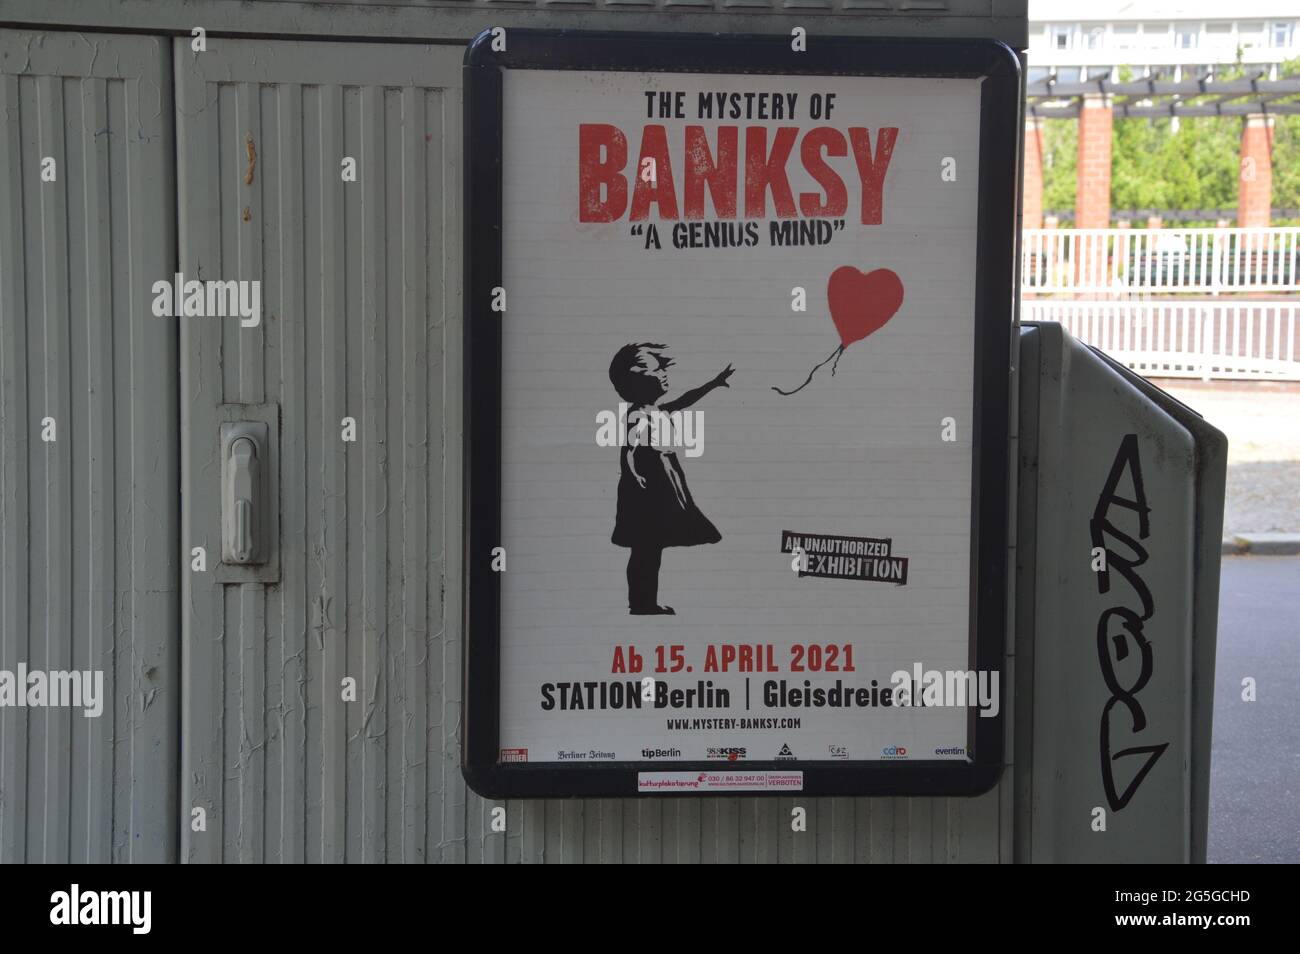 'The Mystery of Banksy' exhbition advertising at Marburger Strasse in Berlin, Germany - June 25 2021 Stock Photo